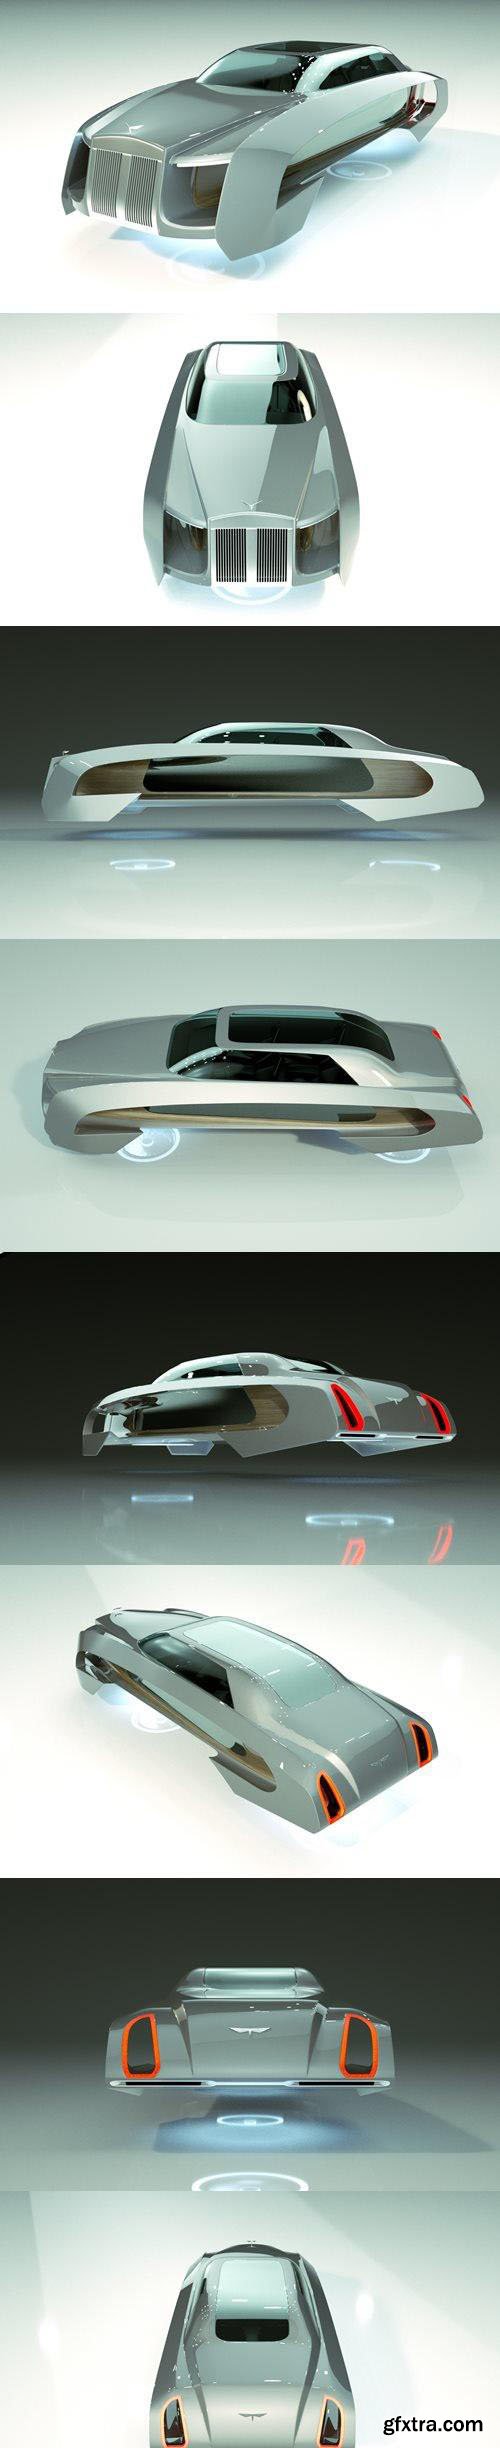 T-Hover Car 15 – Cheap & Cool series - 3D Model